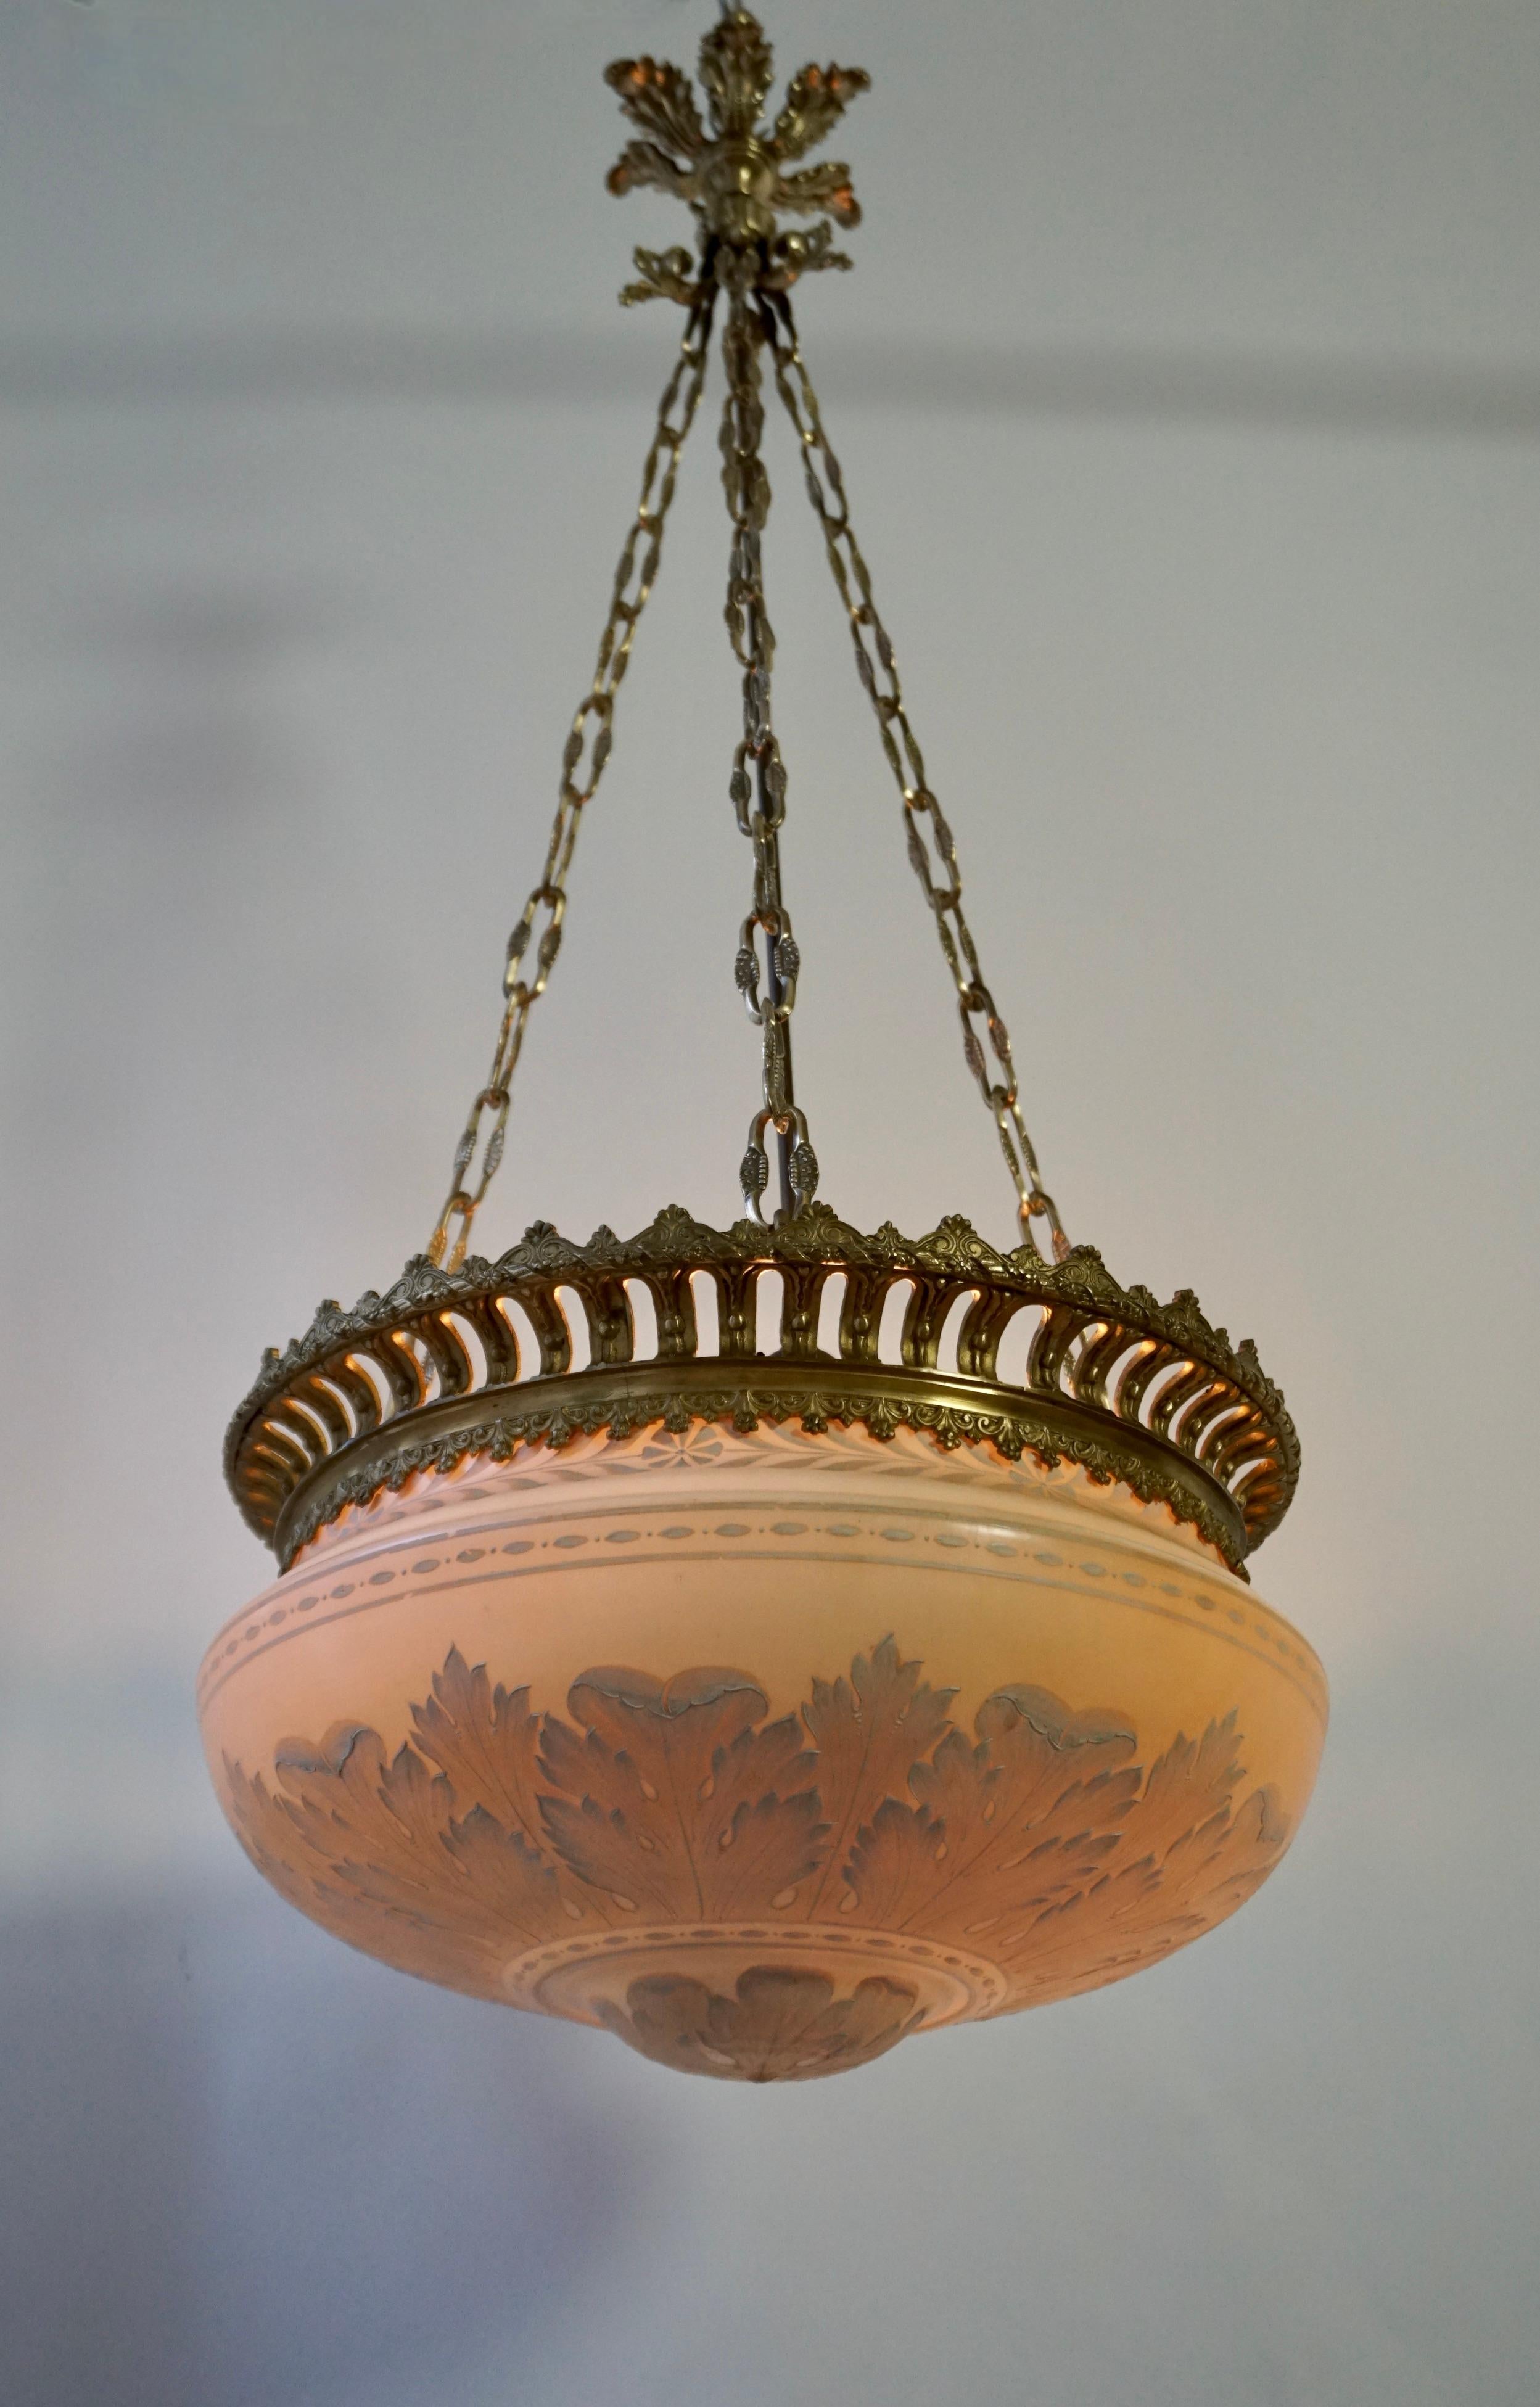 A beautiful rare antique art nouveau chandelier in biscuit and bronze gilt.

The beautiful biscuit bowl is painted with elegant white leaves and hangs in a bronze gilded frame.This biscuit coupe can also be used as flush mount.

Diameter 18.5